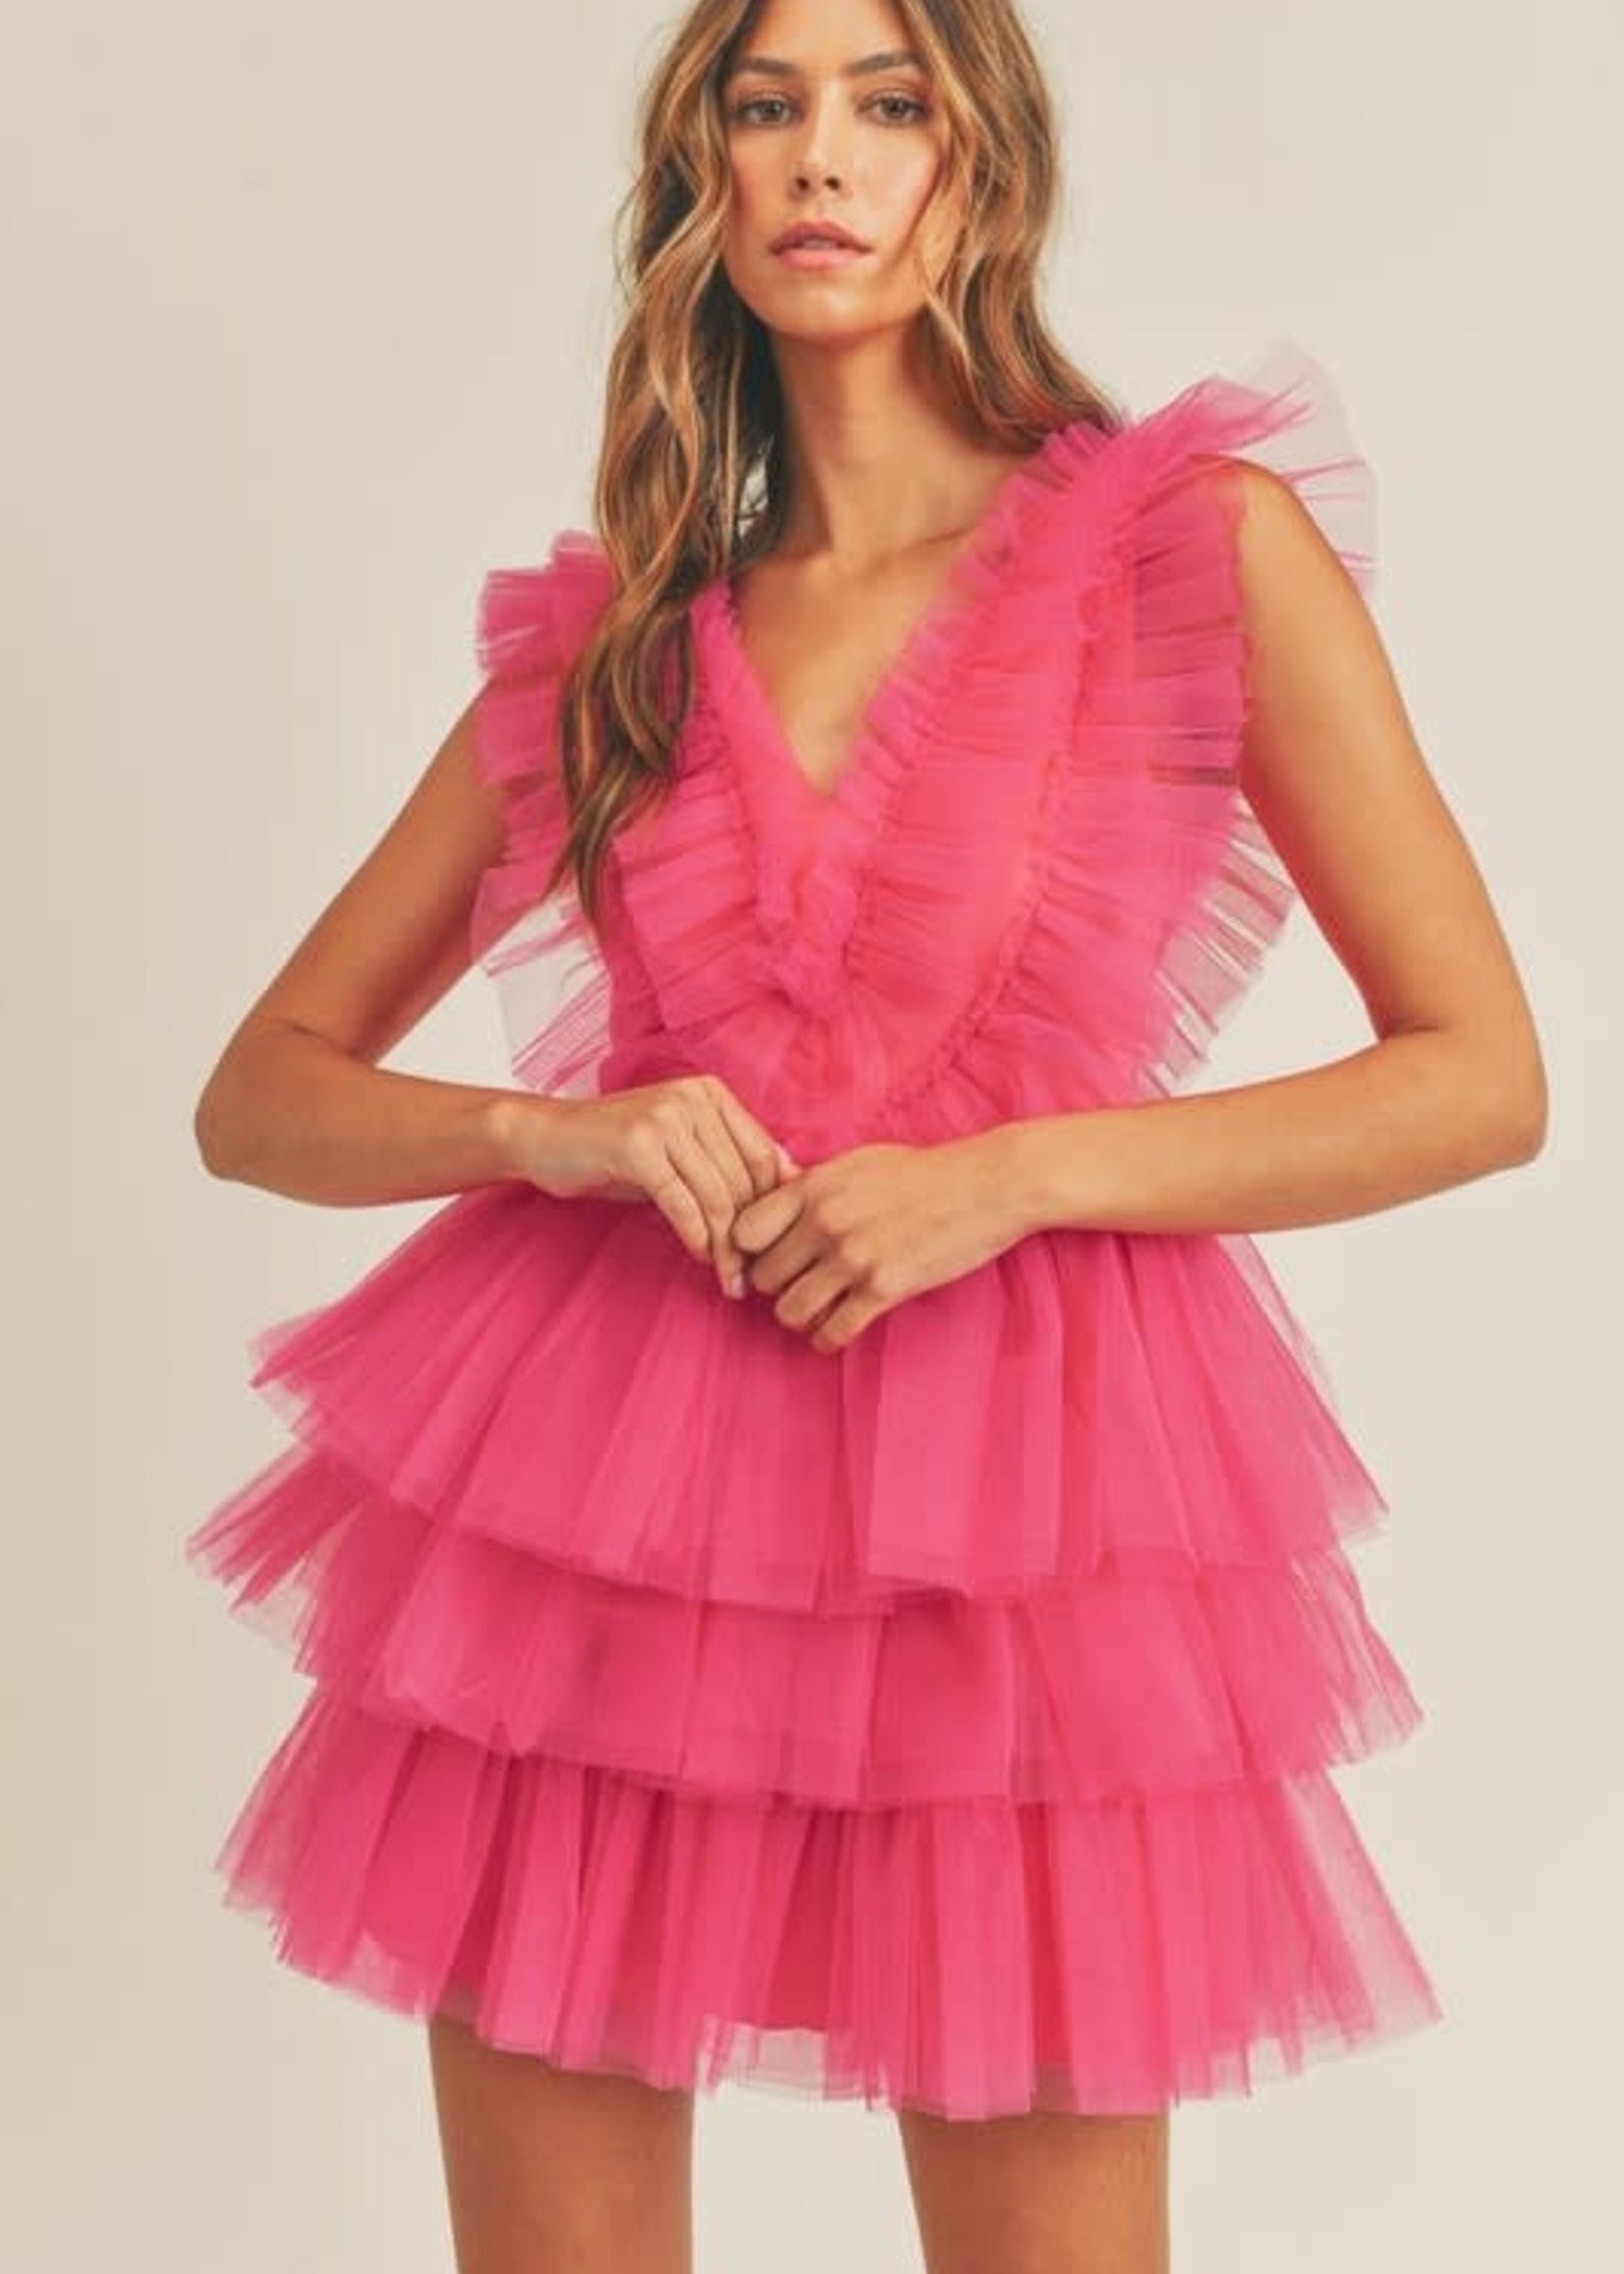 Frill Of The Moment Hot Pink Dress